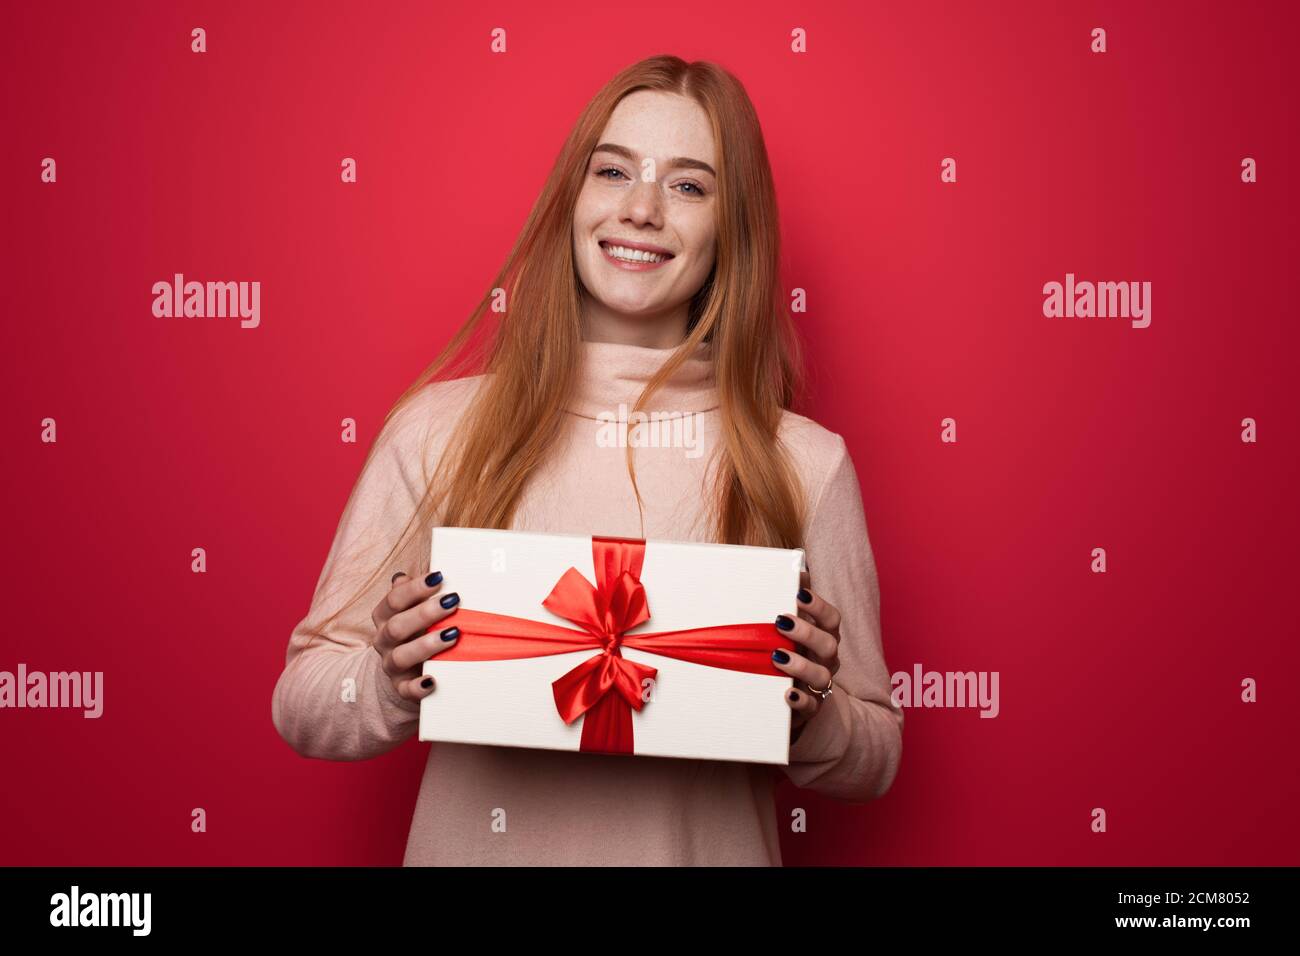 Beautiful caucasian woman with red hair and freckles smiling at camera and holding a present in hands posing on a red studio wall Stock Photo